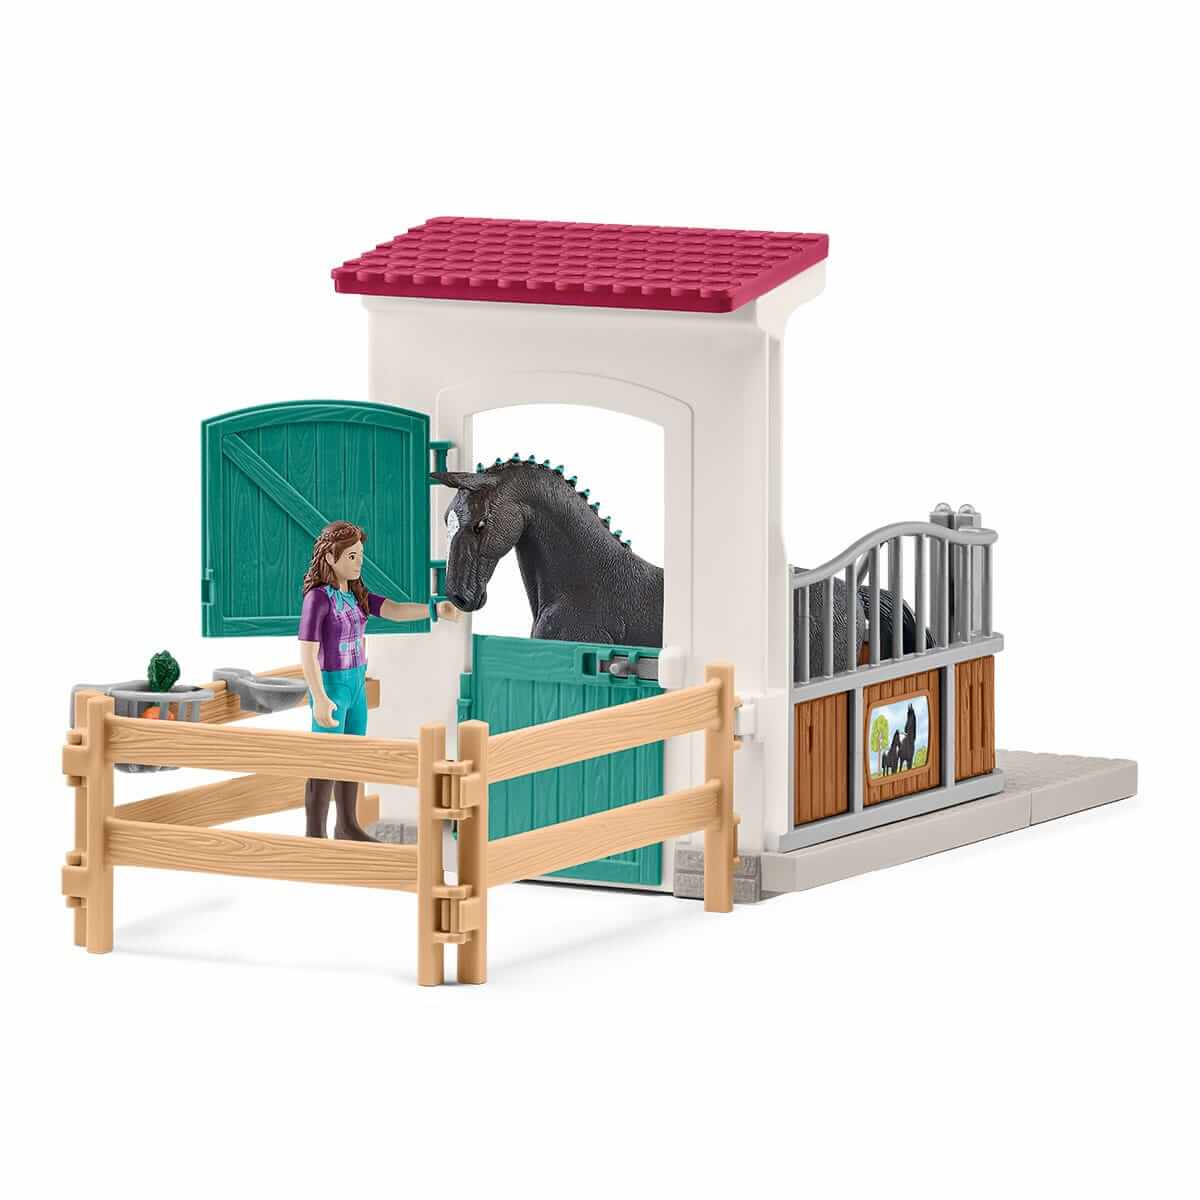 Schleich Horse Club Horse Box with Lisa & Storm Set